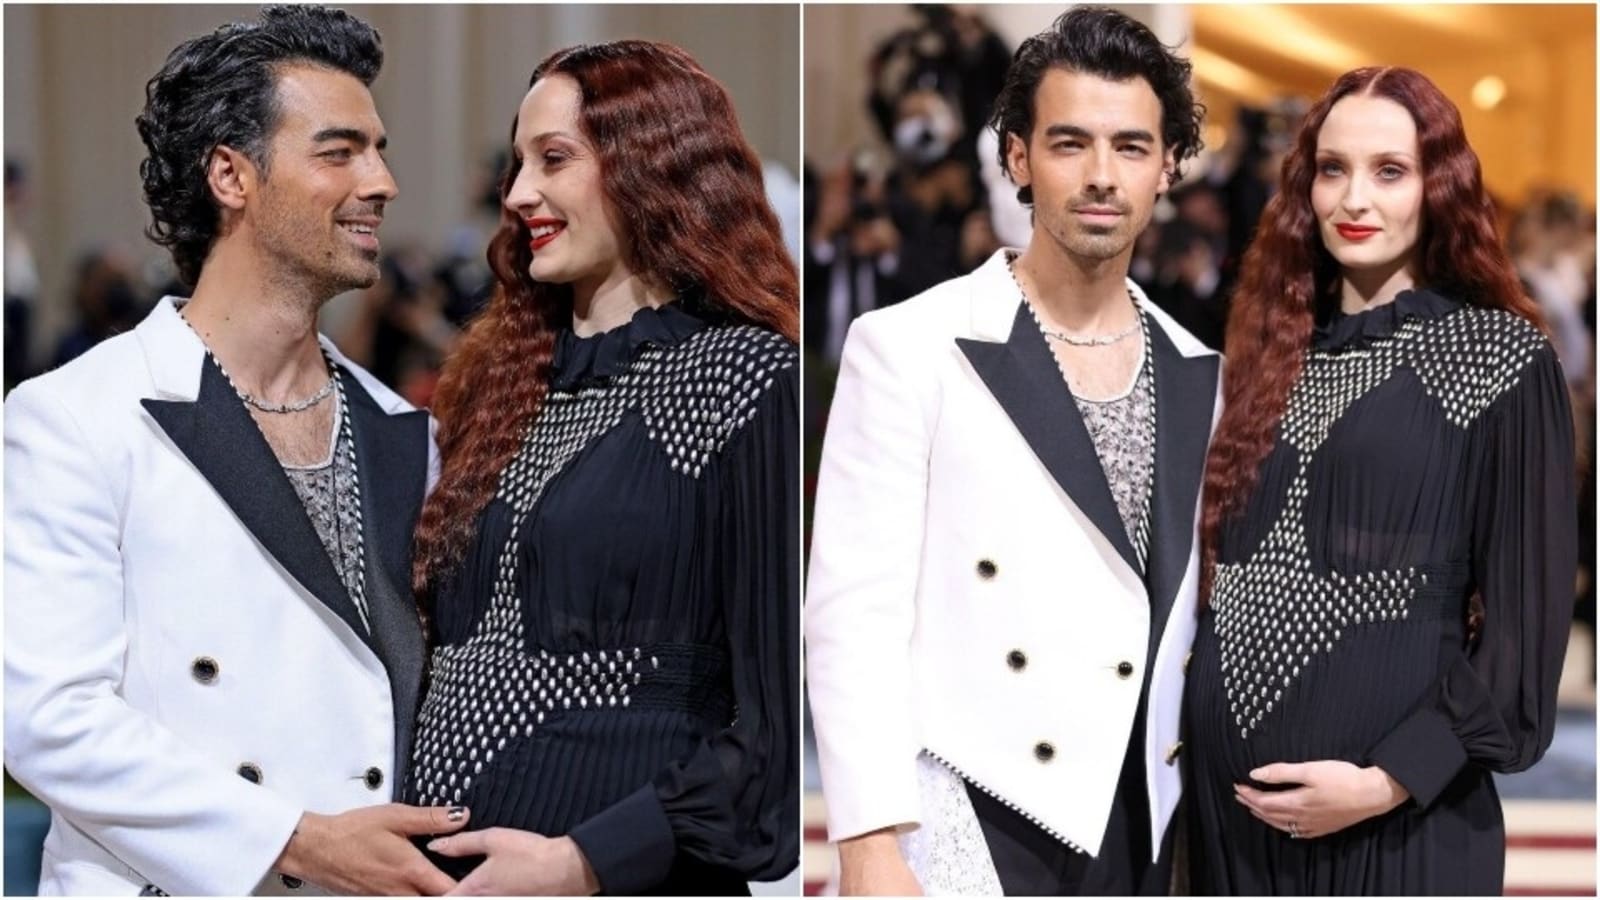 Pregnant Sophie Turner with Joe Jonas flaunts baby bump at the Met Gala red carpet in embellished black gown, see photos